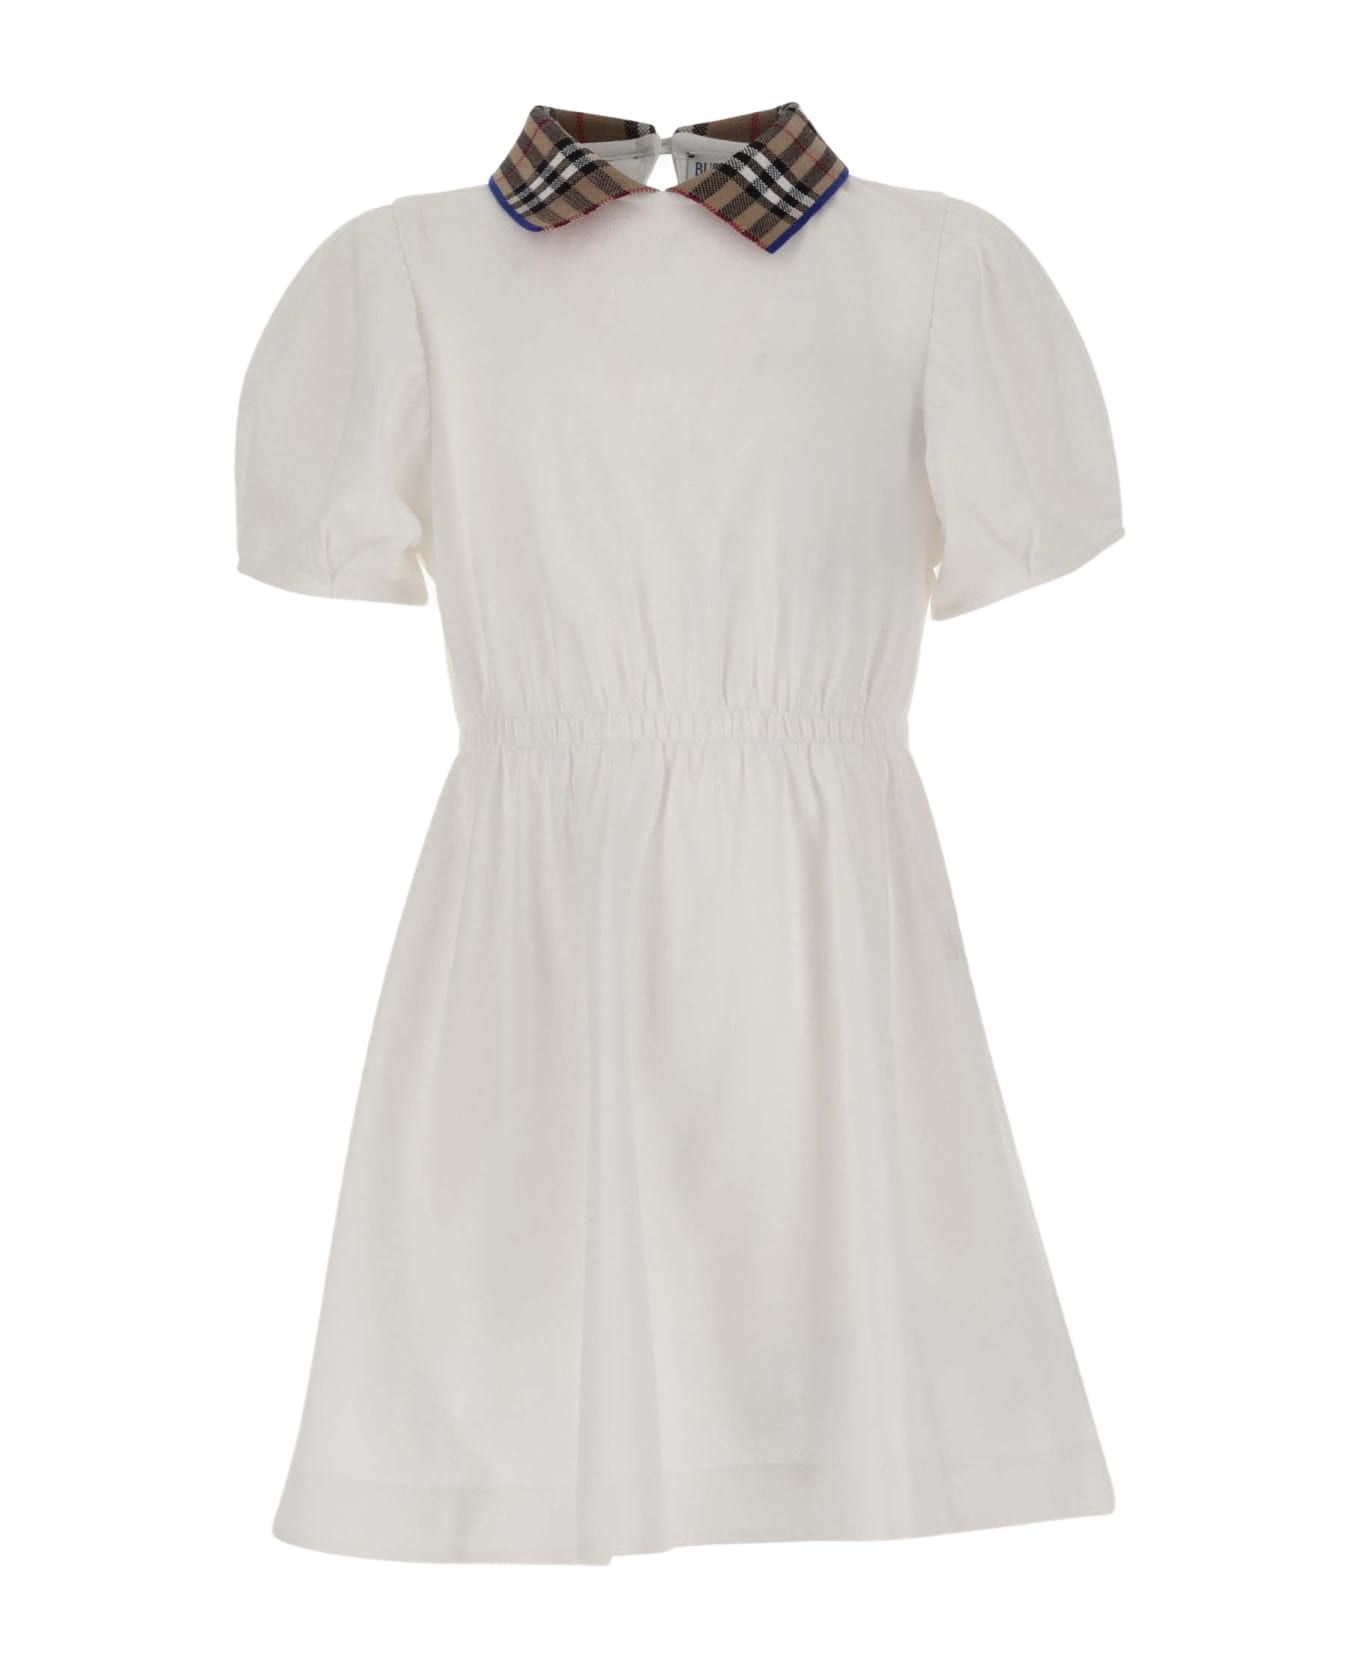 Burberry Polo Shirt Dress With Check Pattern - White ワンピース＆ドレス